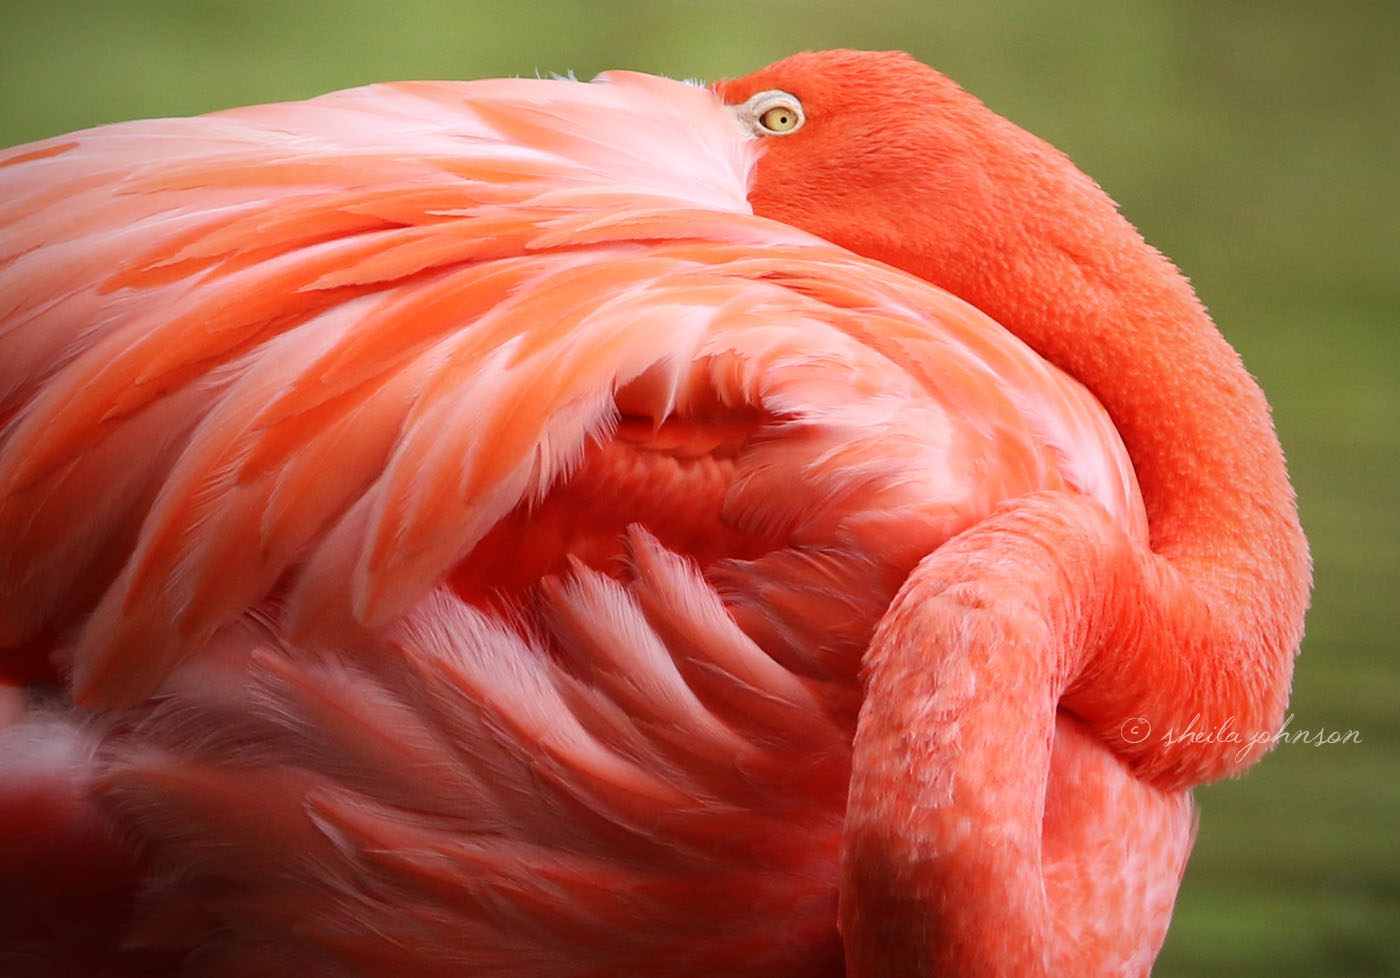 Do You Ever Have That Feeling Someone's Watching And Not Sure Where It's Coming From? Yeah. That, Mr. Flamingo.